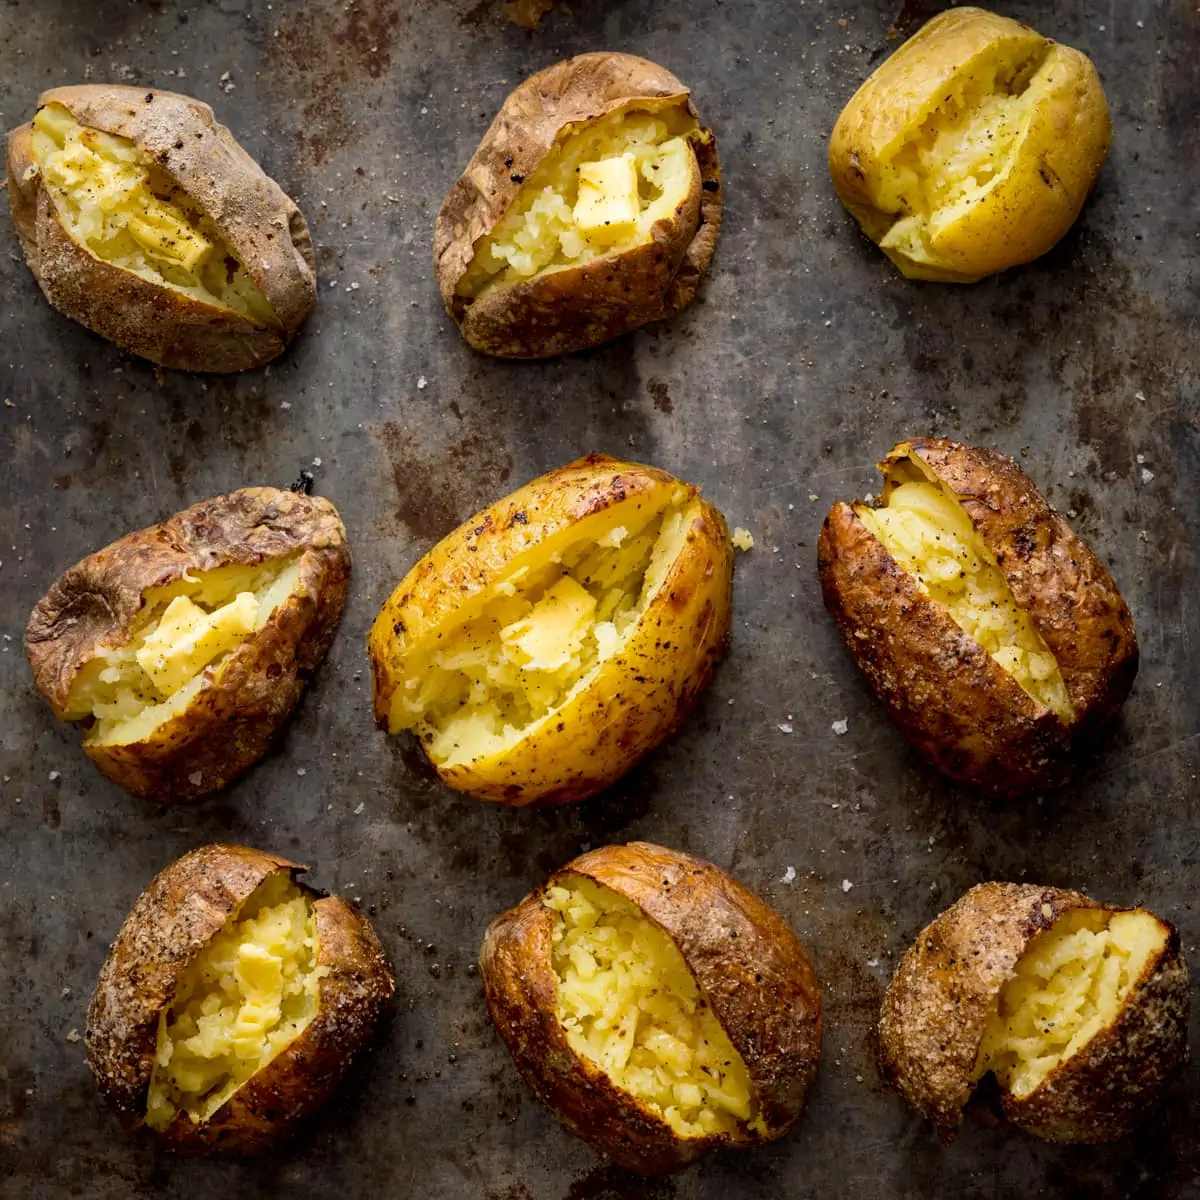 Square image showing 9 baked potatoes on a metal tray.